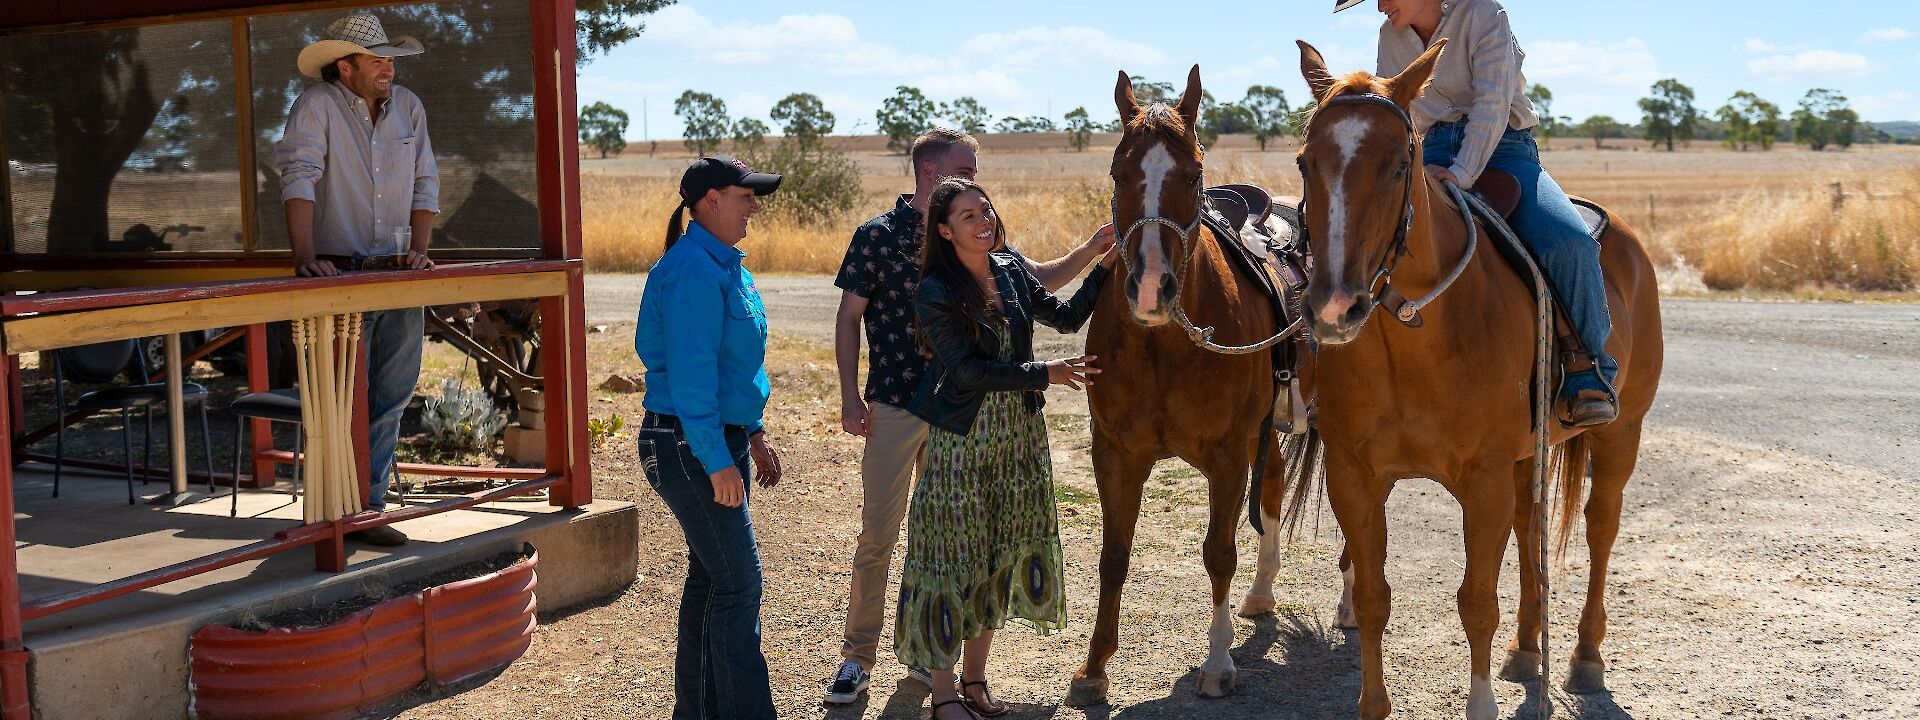 Greeting the horses at the Wheatsheaf, Barossa Valley, Australia. CC:Barossa Helicopters